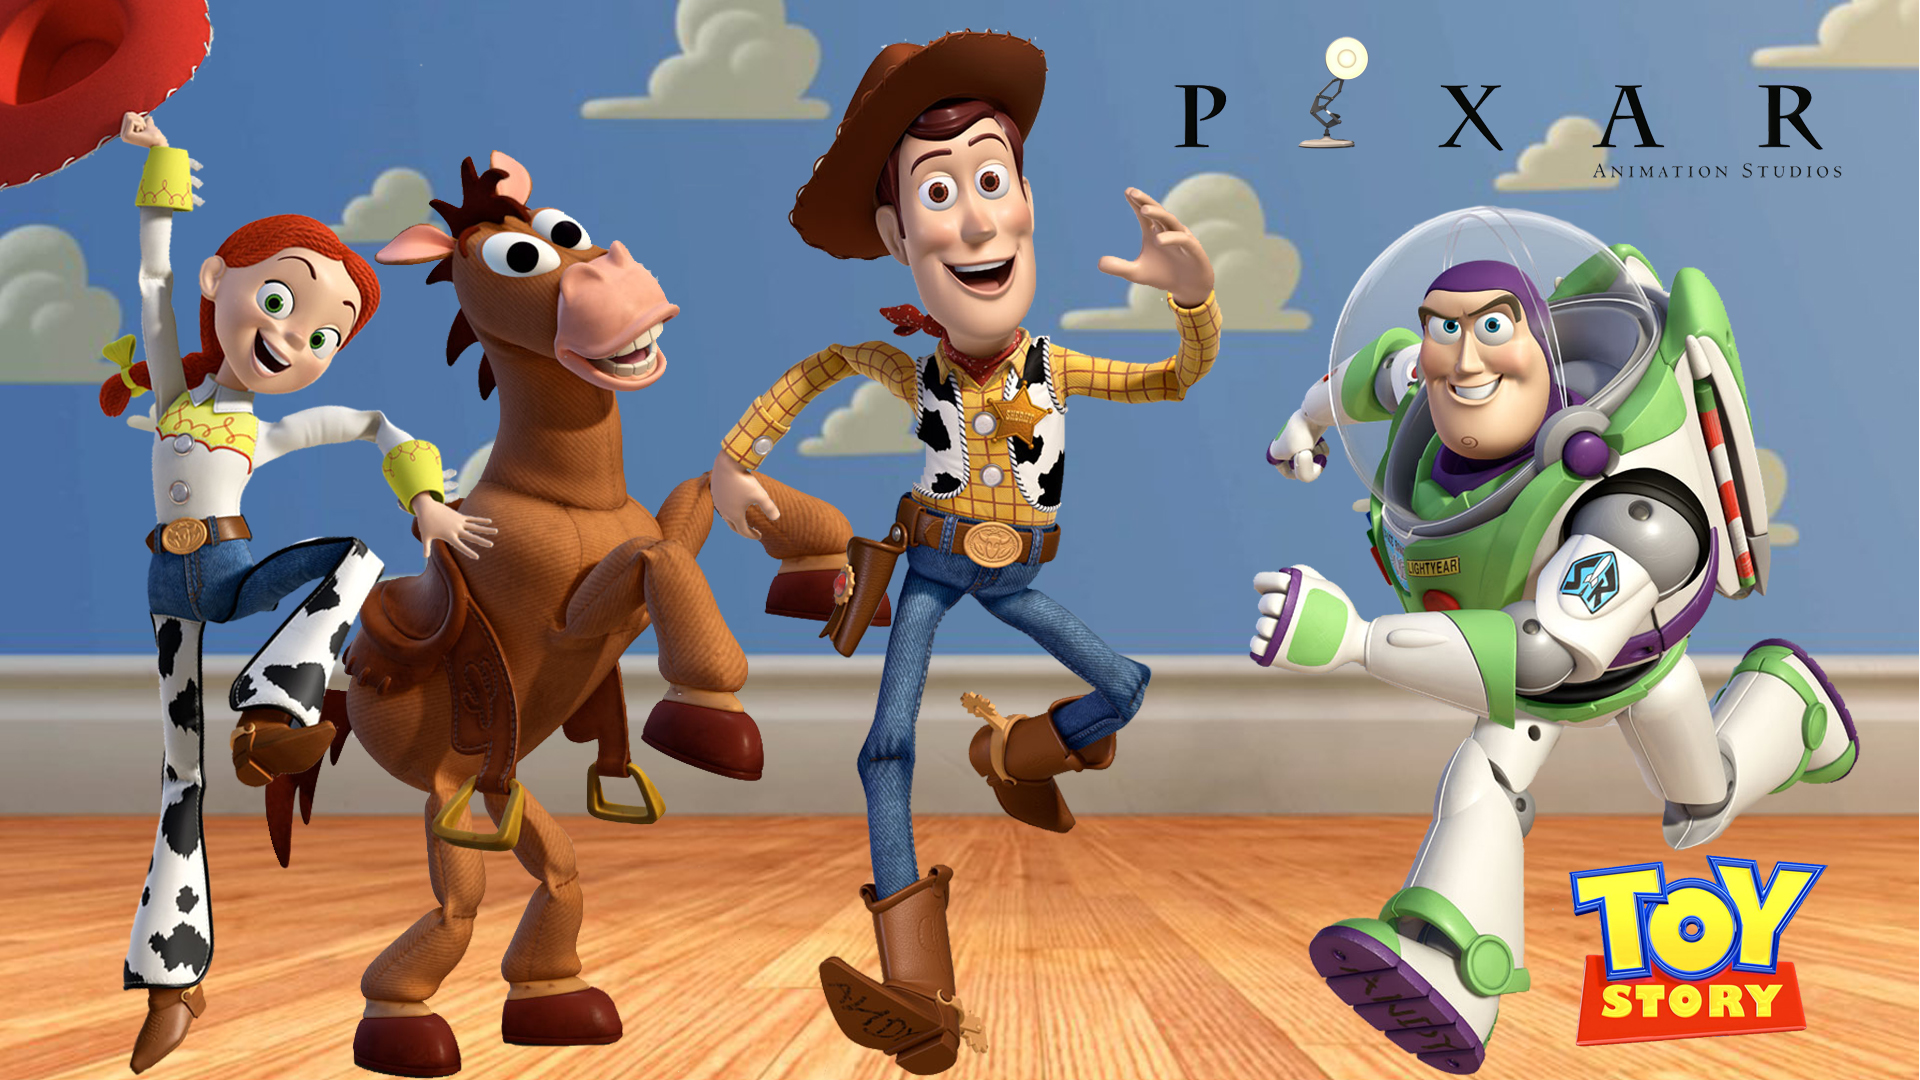 Toy Story 2K wallpapers free download